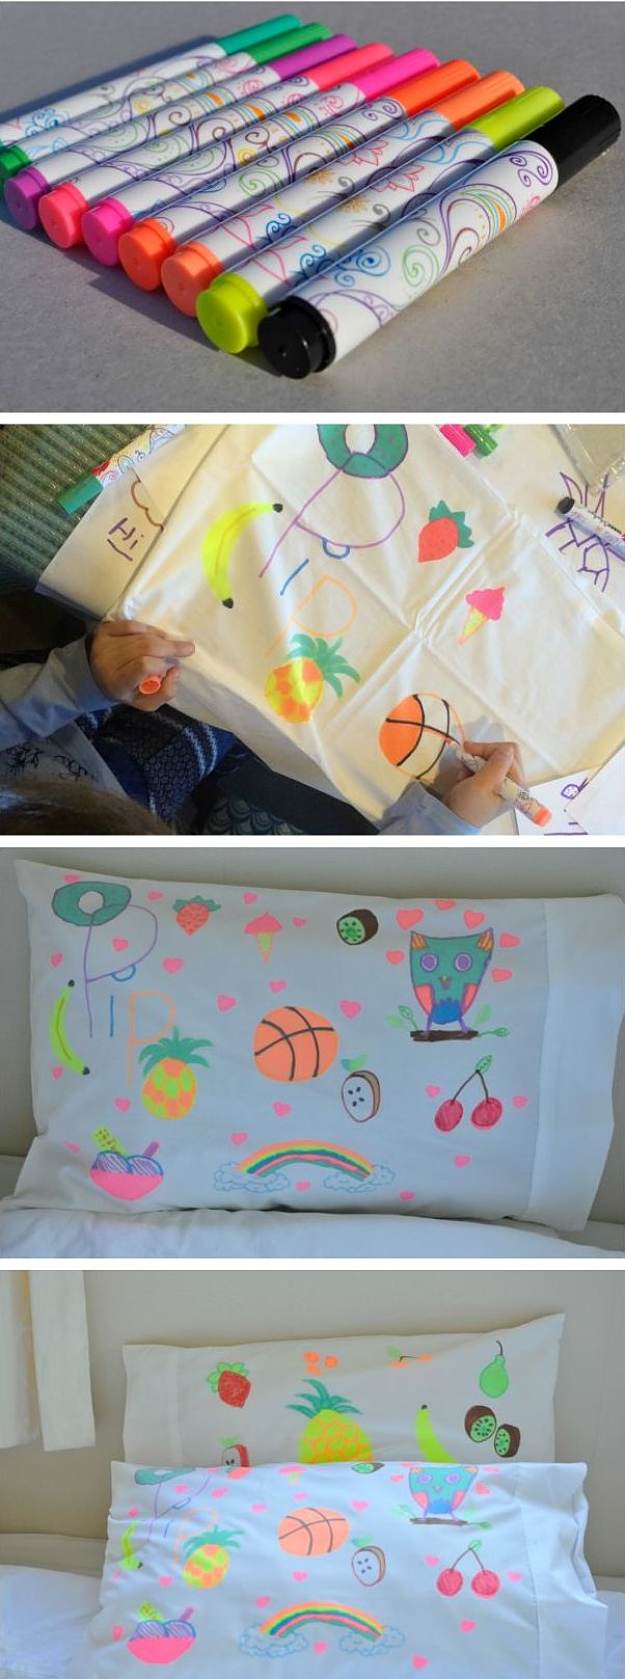 Design Your Own Pillowcase | Rainy Day Activities | 32 Fun Things For You And Your Kids To Do Indoors